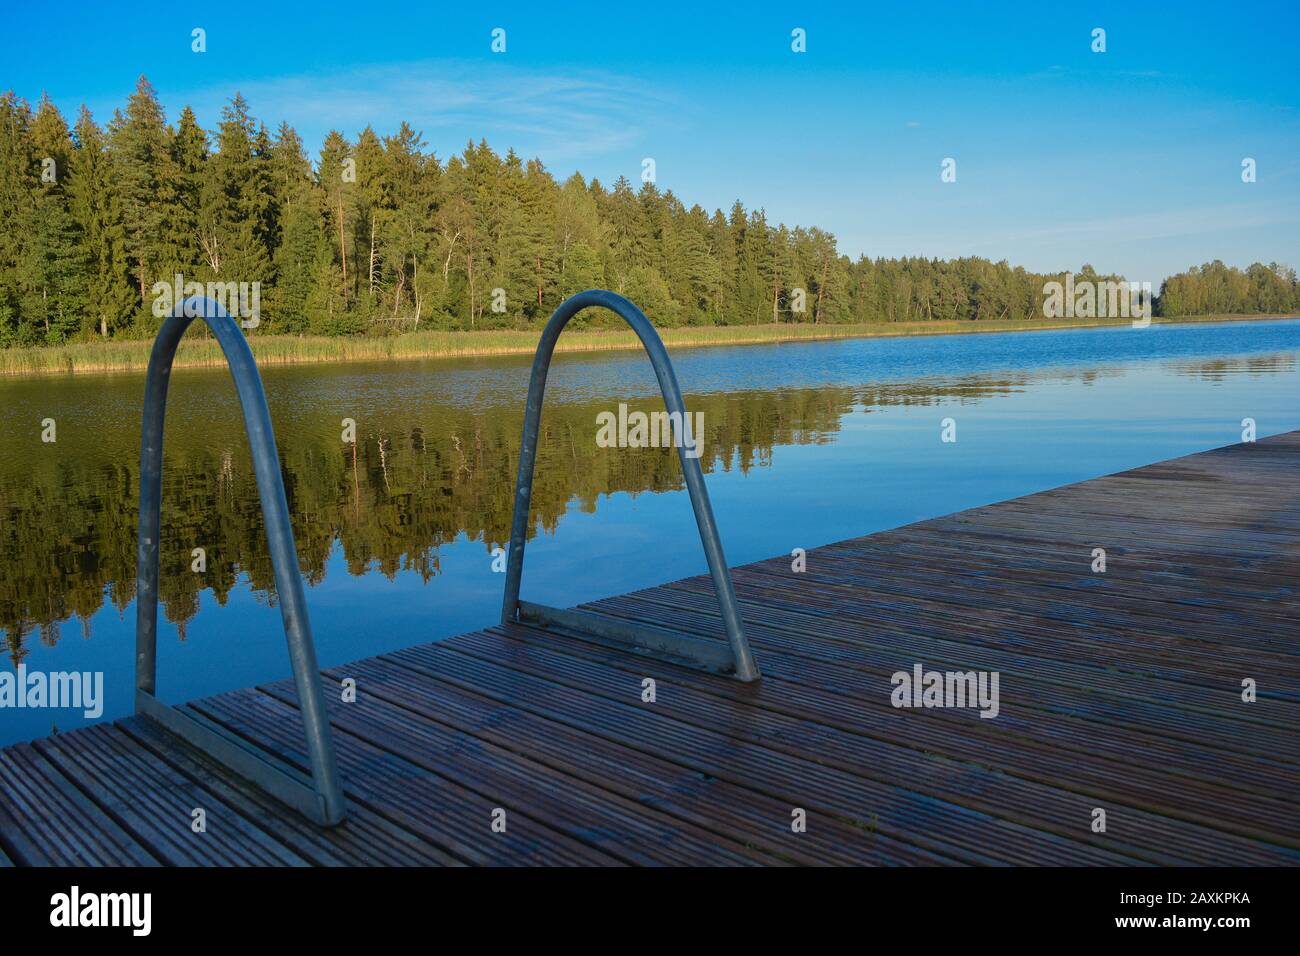 Relaxing summer day on a peaceful and clean river. Wooden platform steel ladders for a refreshing jump or a energetic swim. Forest reflects into water Stock Photo